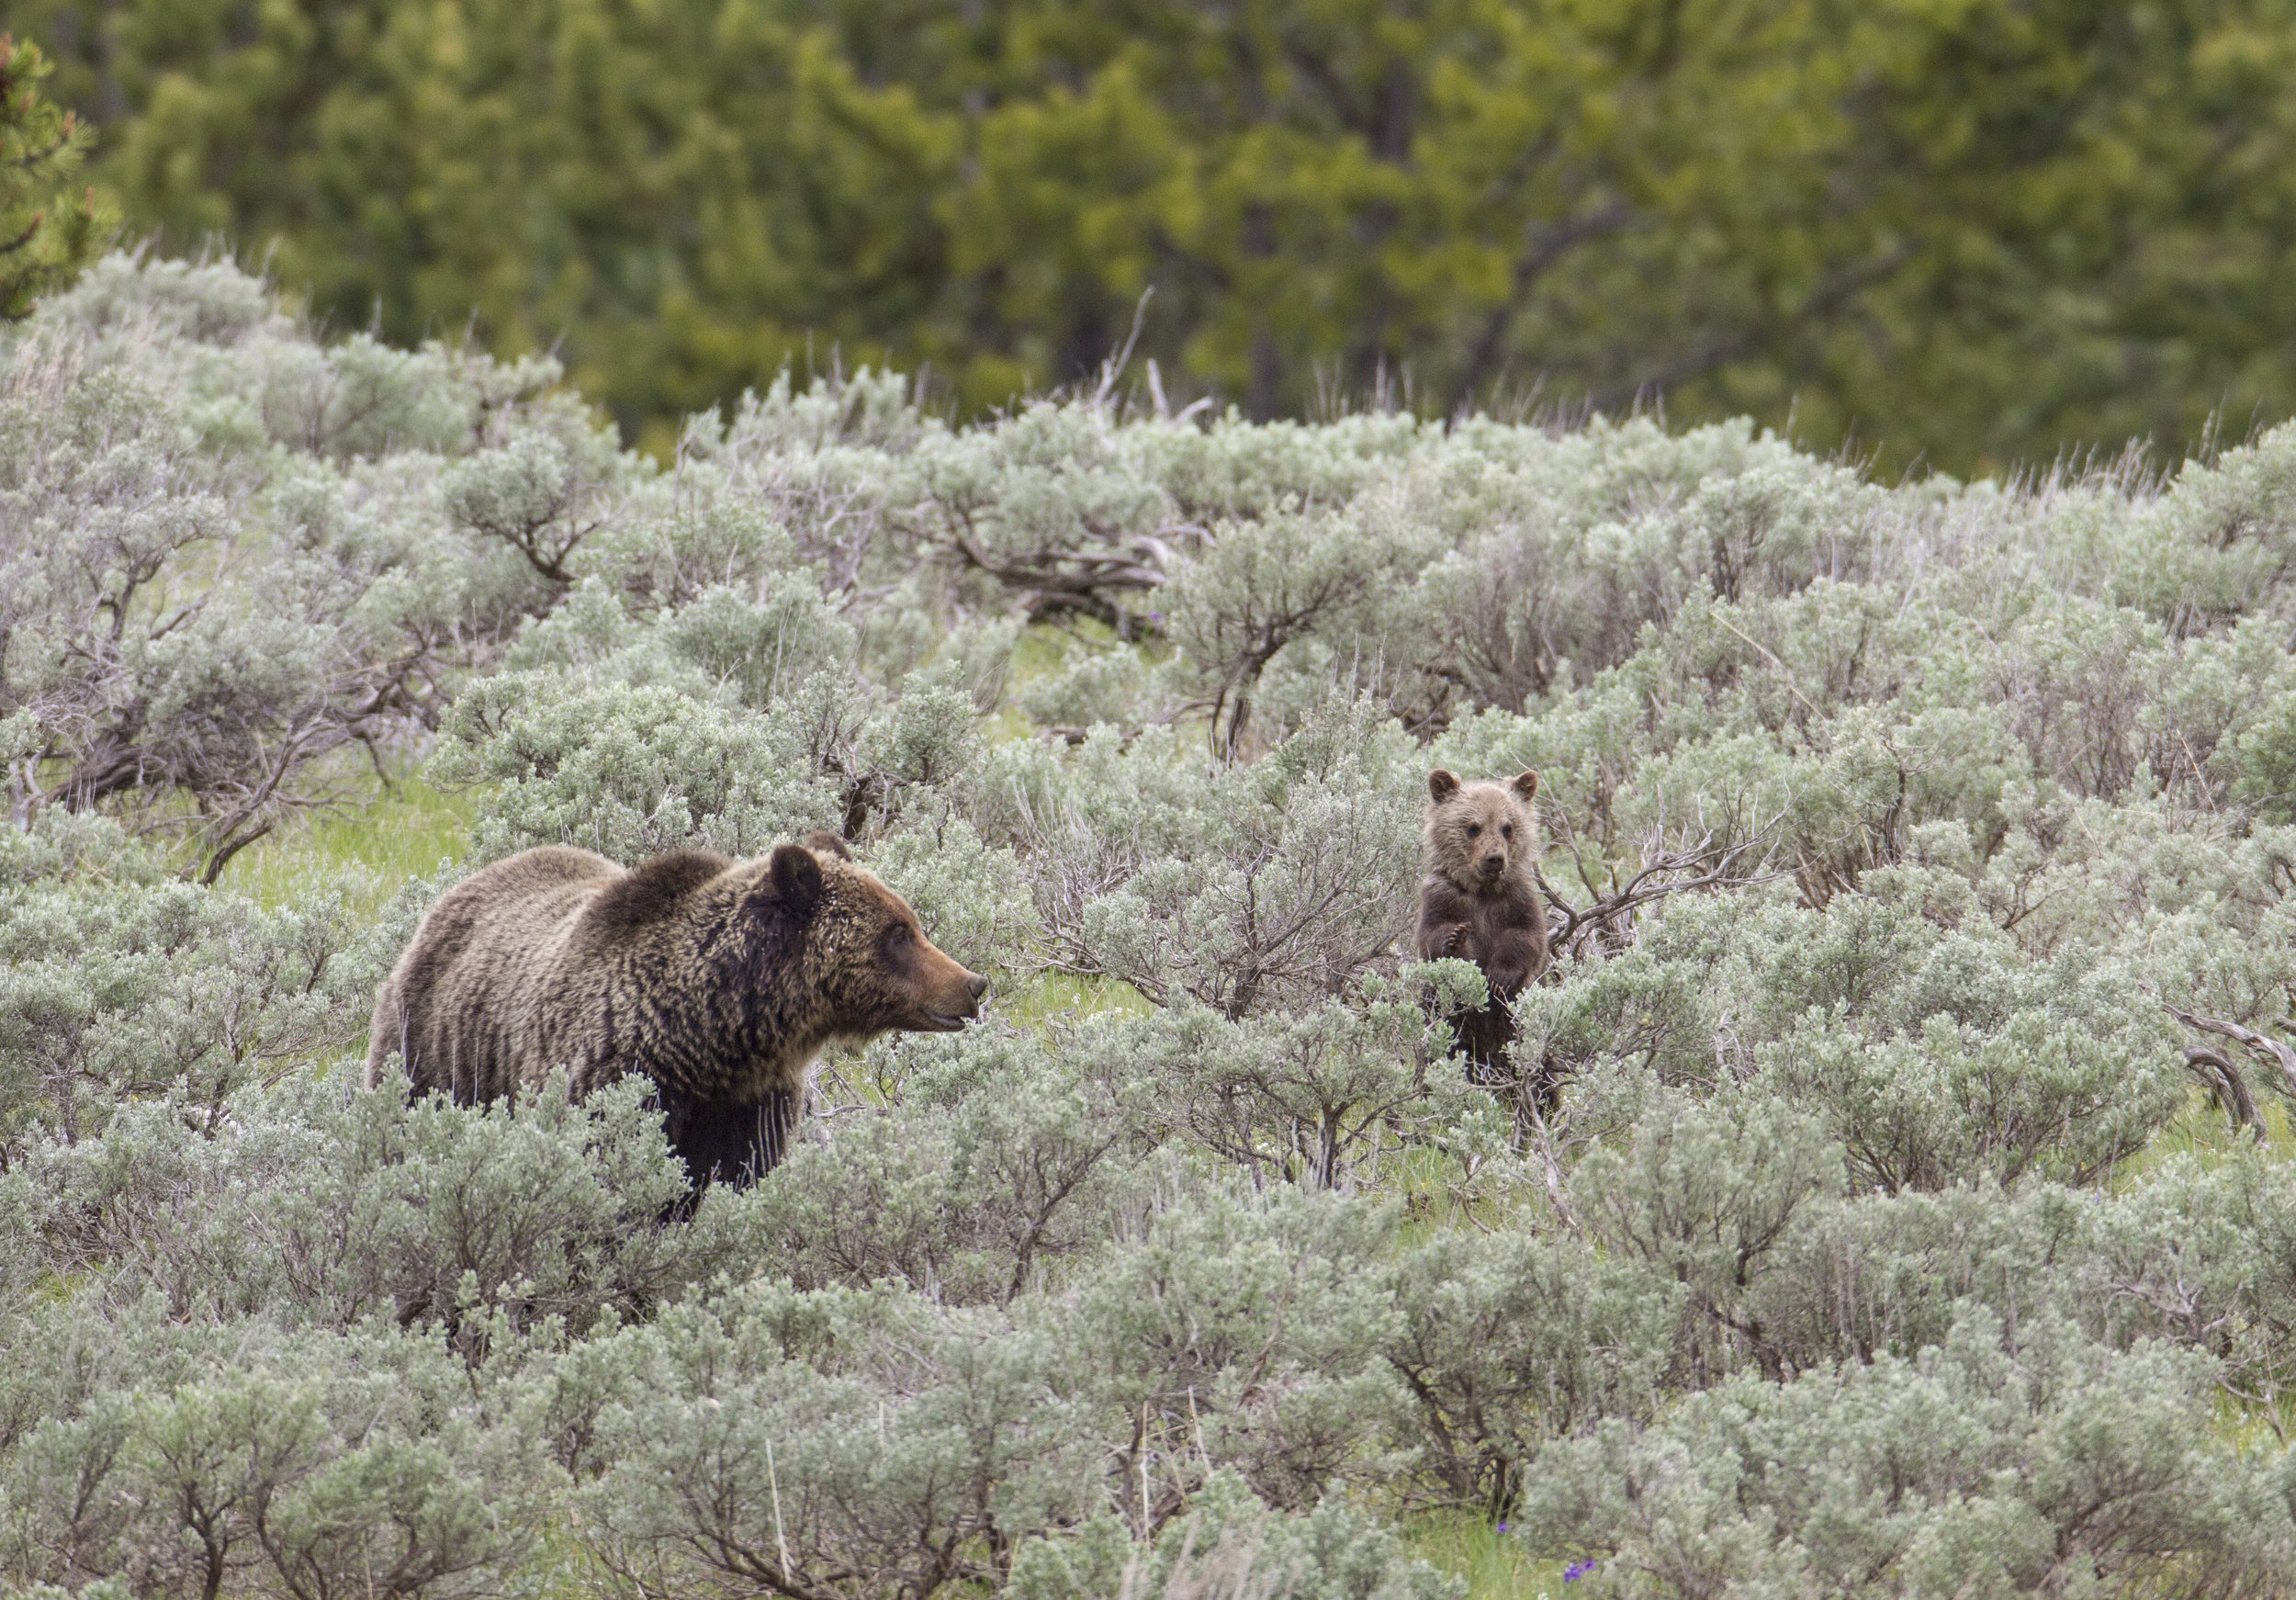  A grizzly sow and cub ( photo courtesy National Park Service/Jim Peaco ).  